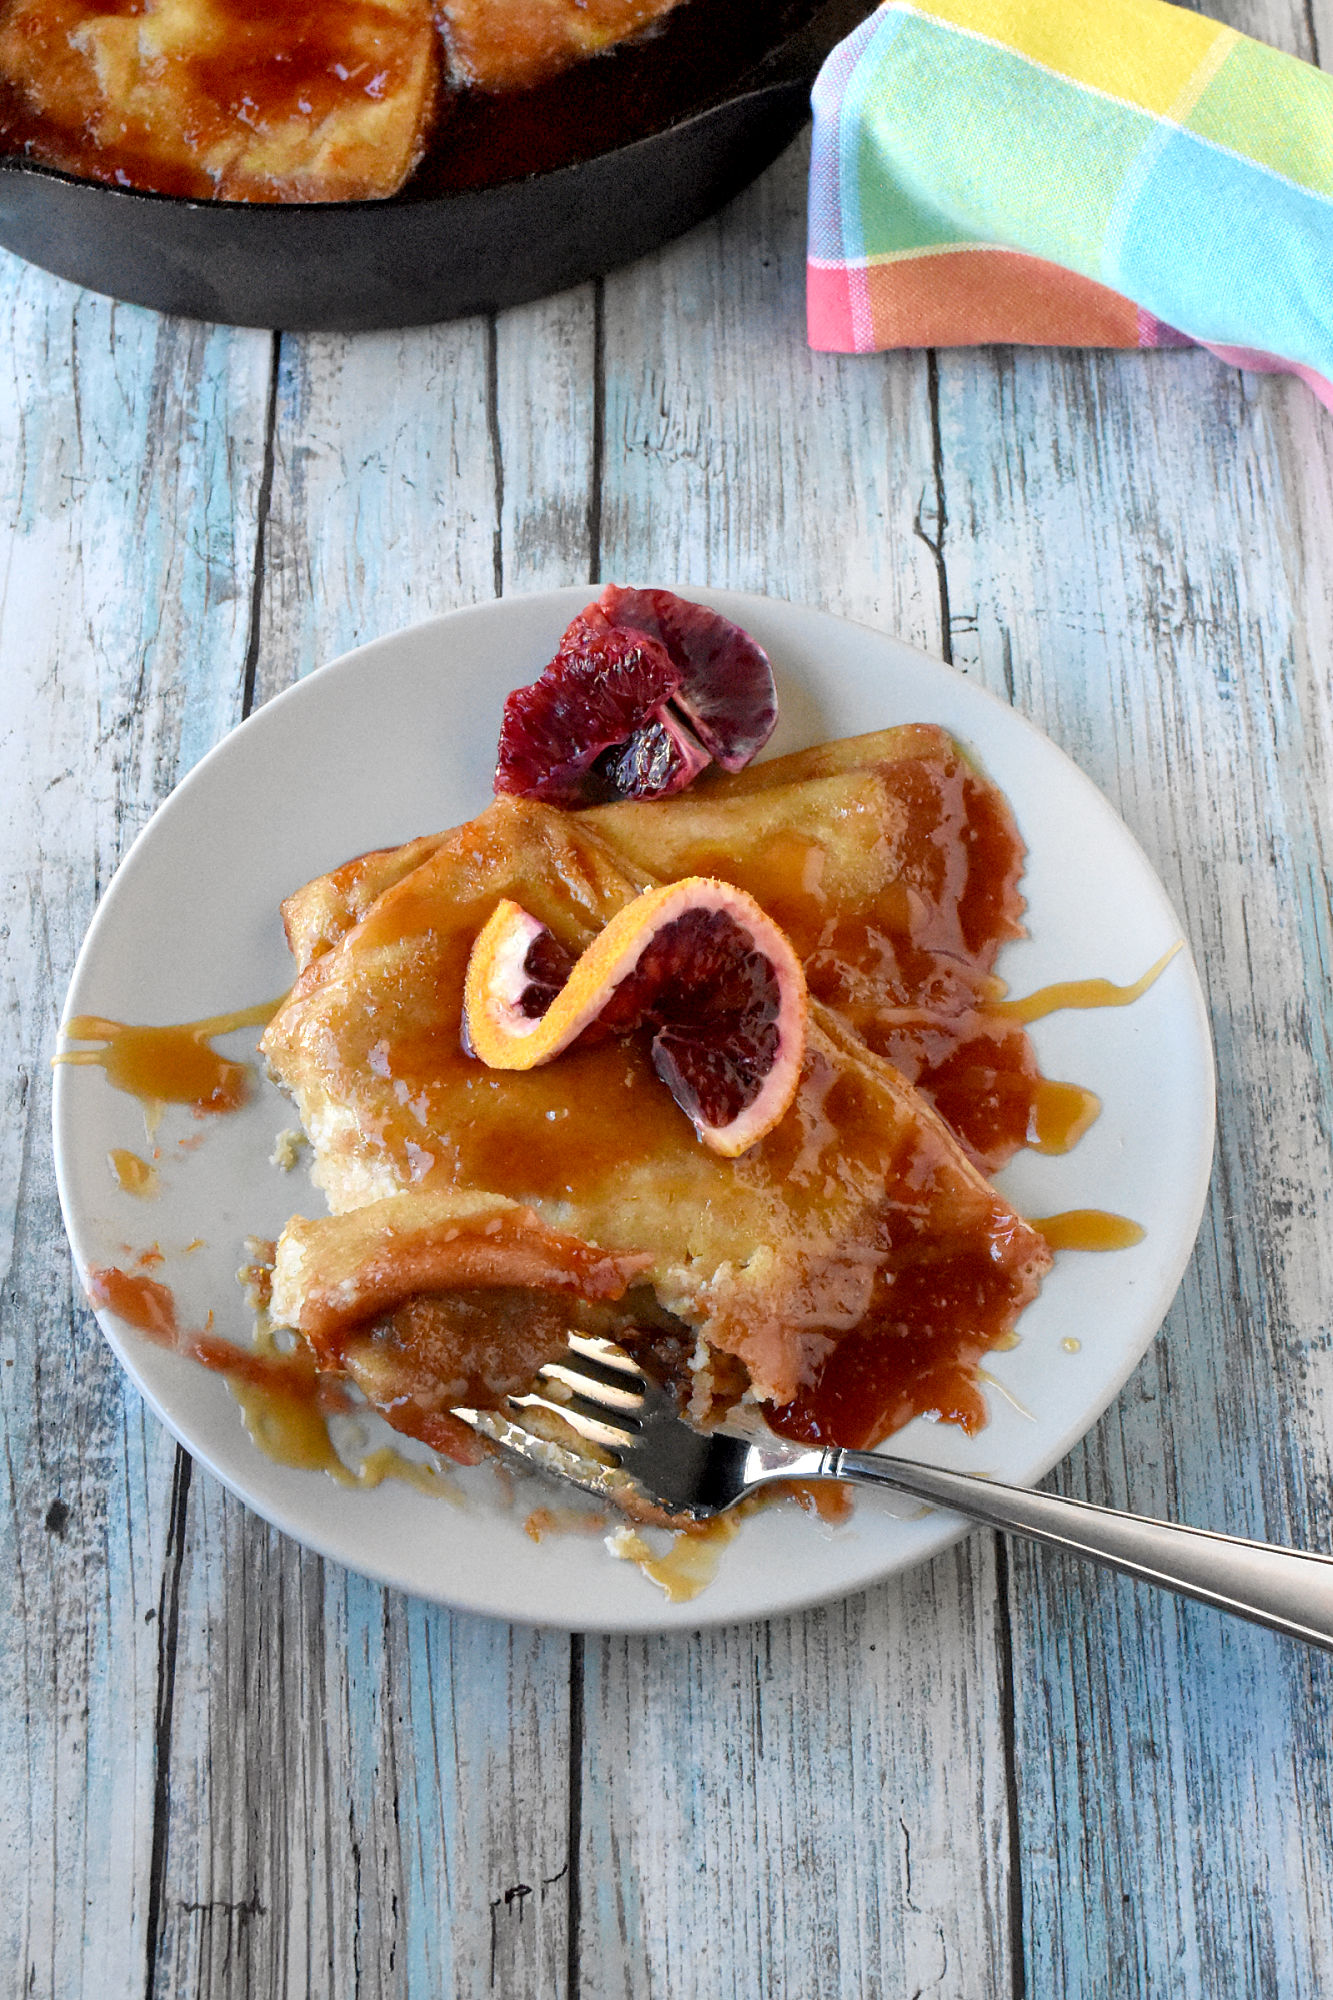 Satisfy your sweet tooth with the ultimate indulgence - #BloodOrange Crepe Suzette! A citrus twist on a classic dessert that is sure to brighten up your day.  #SpringSweetsWeek #dessertlover #foodie #CitrusCreations #SweetAndTangy #FruitDesserts #FrenchInspiredTreats #FlamingCrepes
